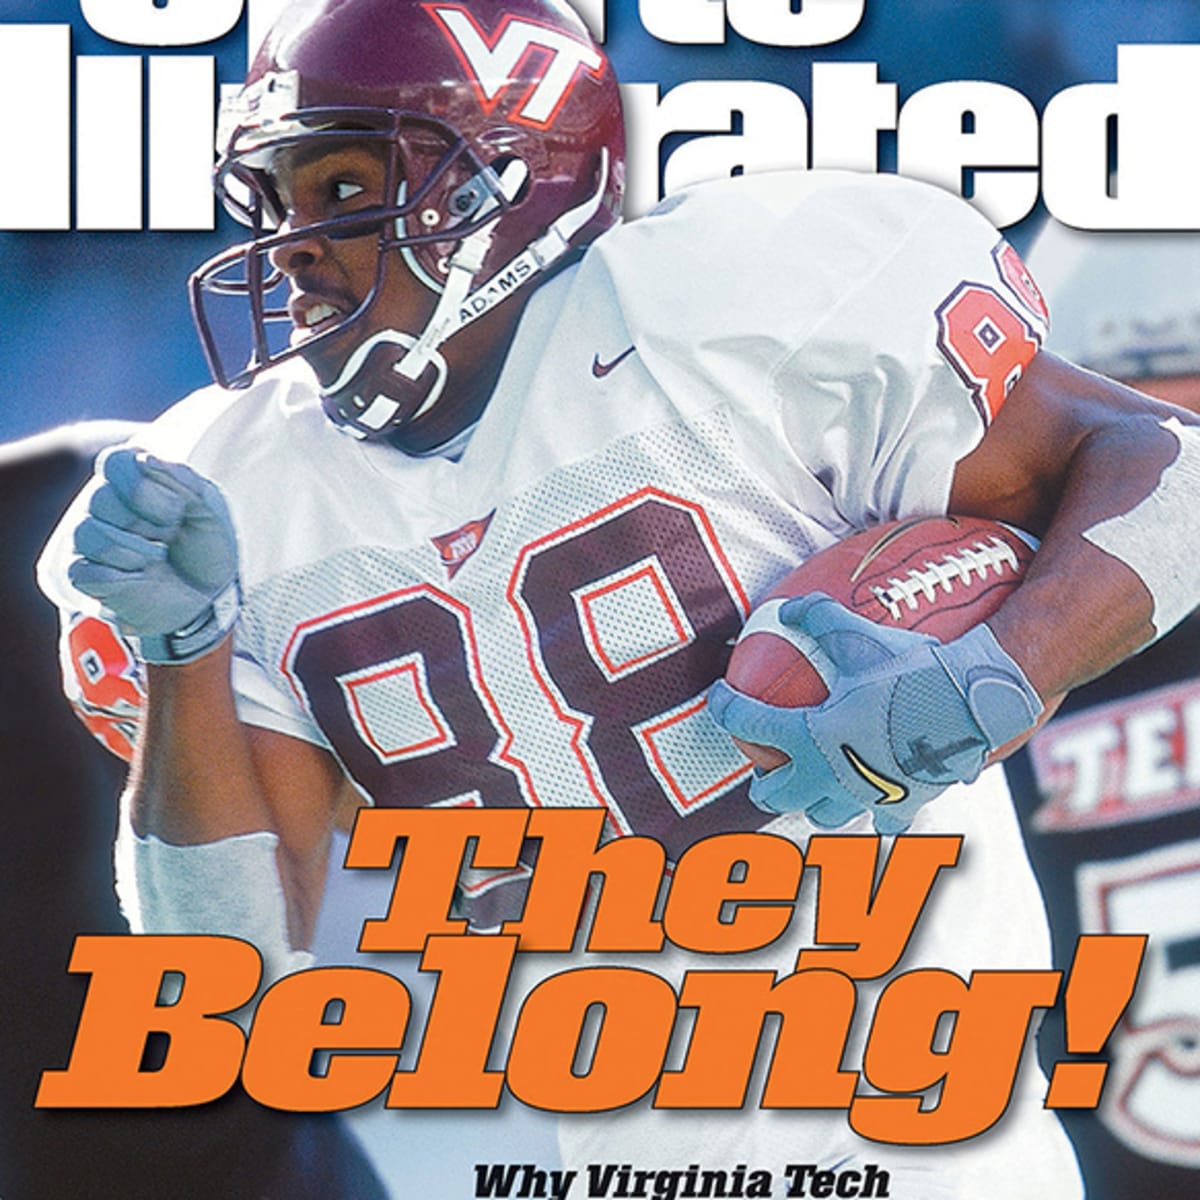 THE TORMENTS OF EXCELLENCE - Sports Illustrated Vault